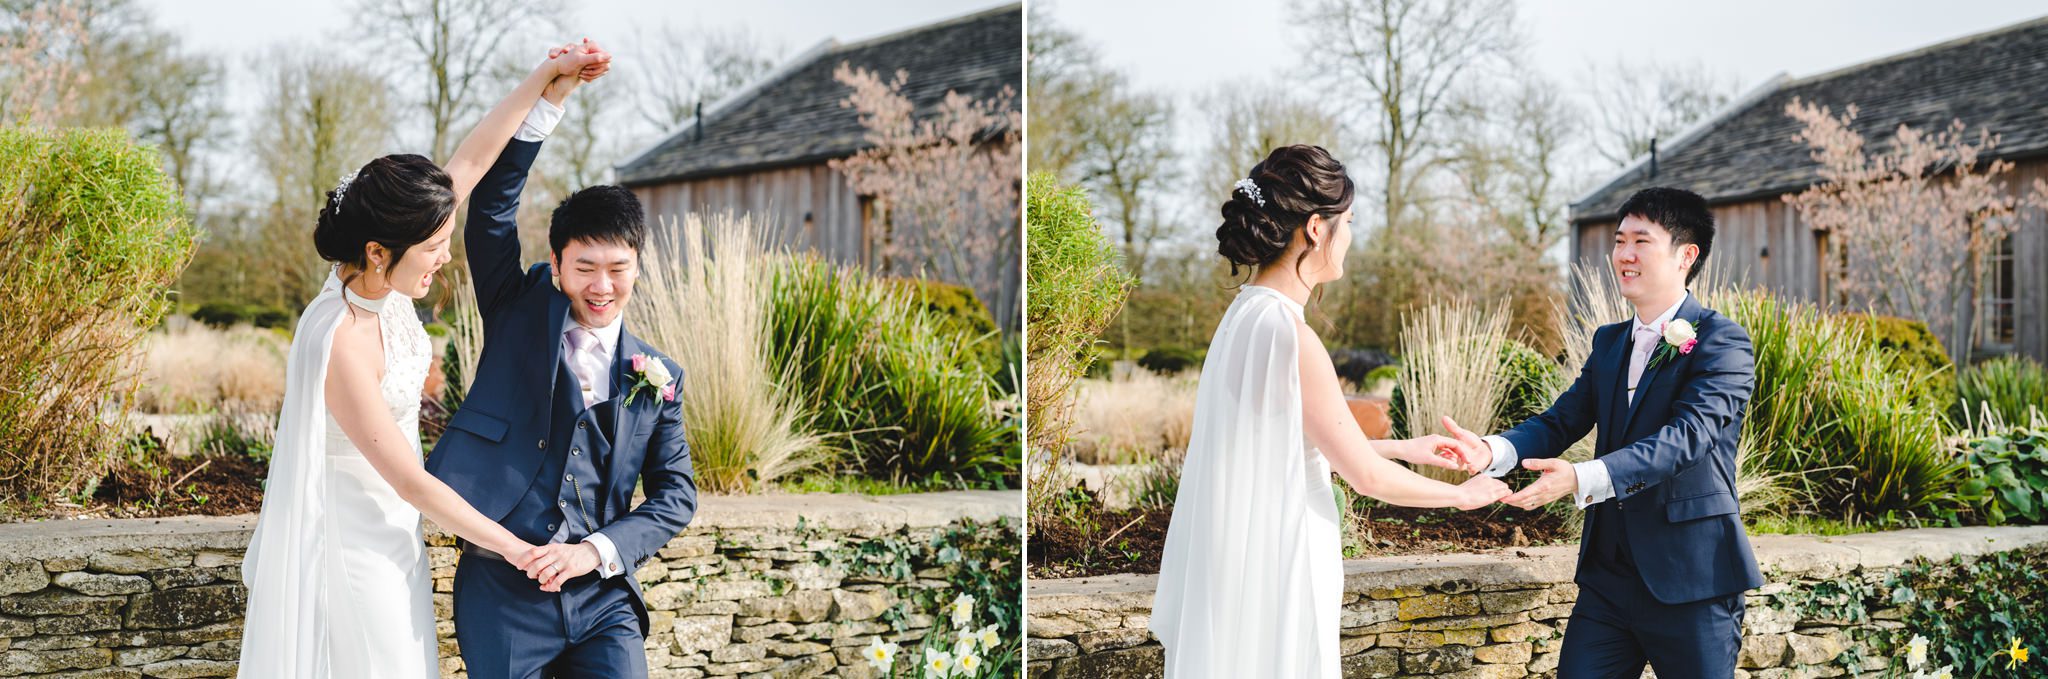 Bride and groom portrait photography at Hyde House